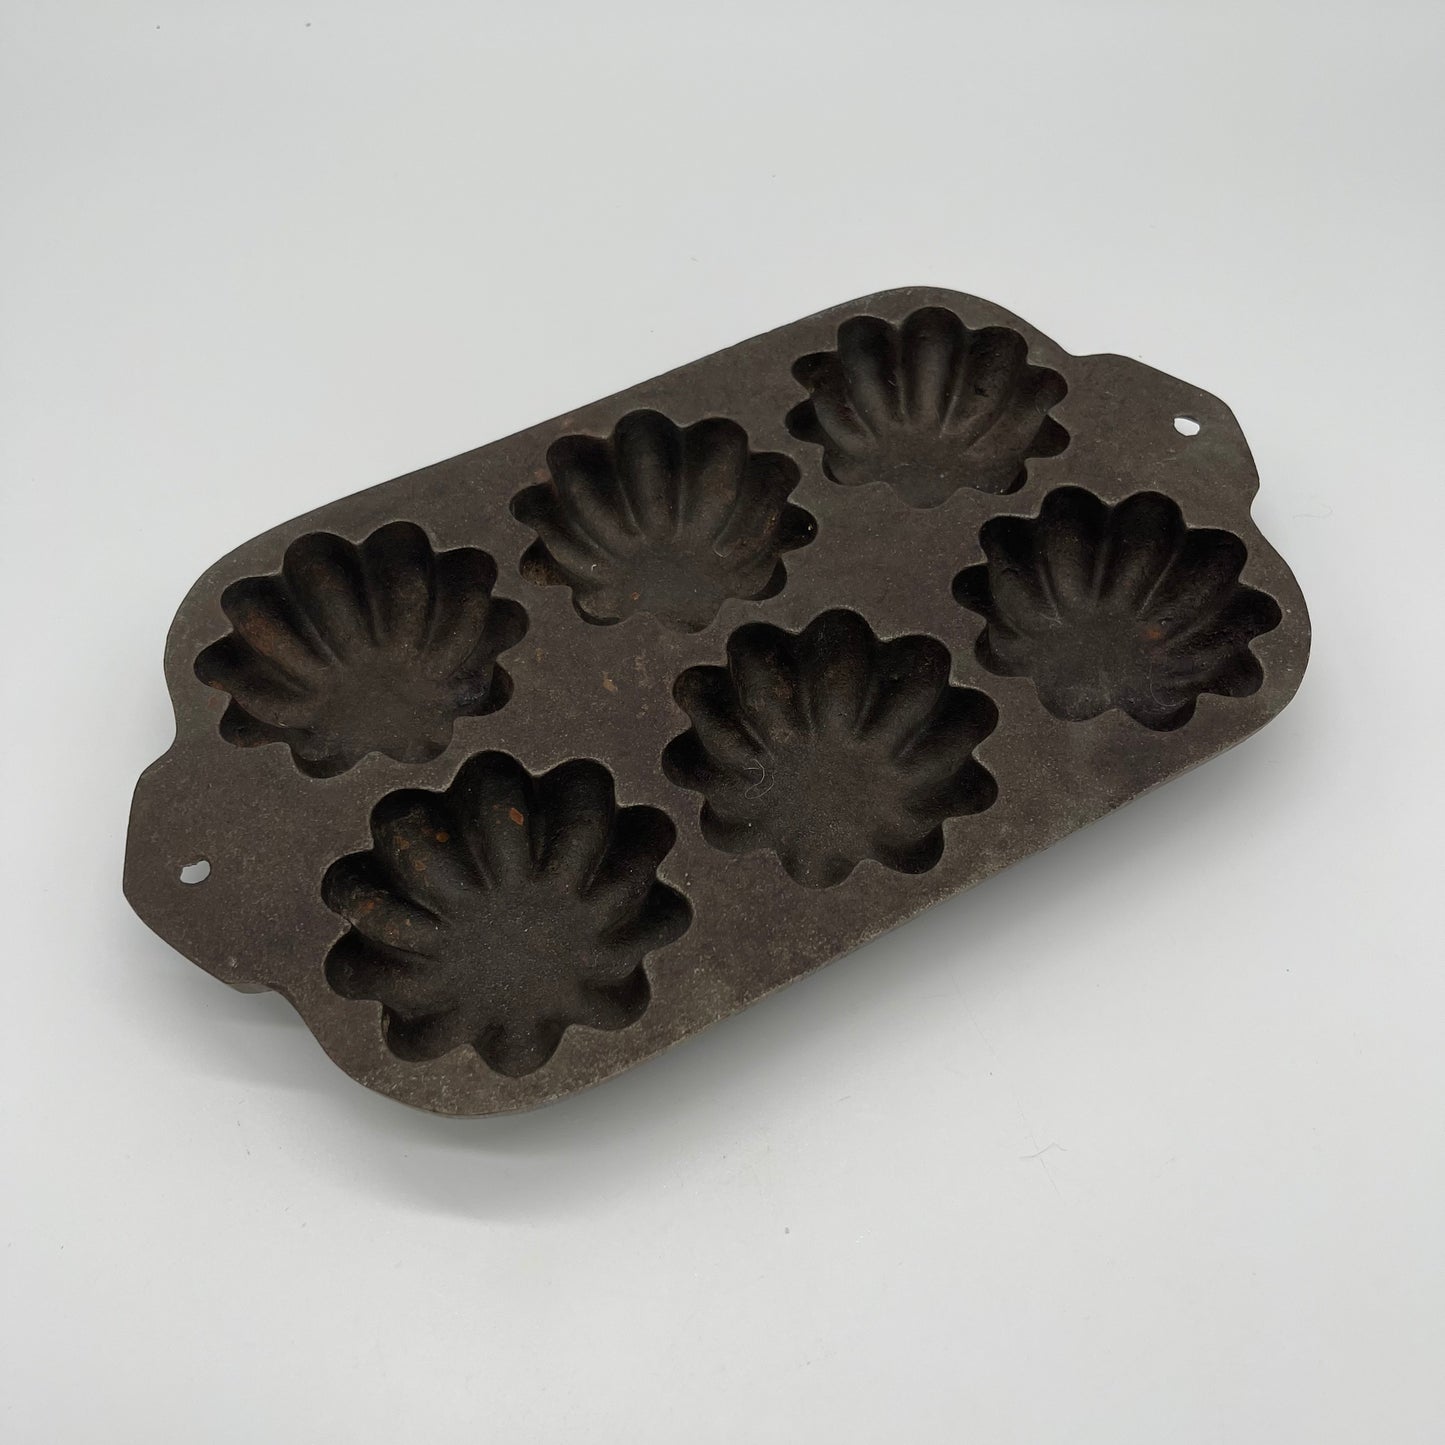 Cast Iron Muffin Pan (Item Number 0169)